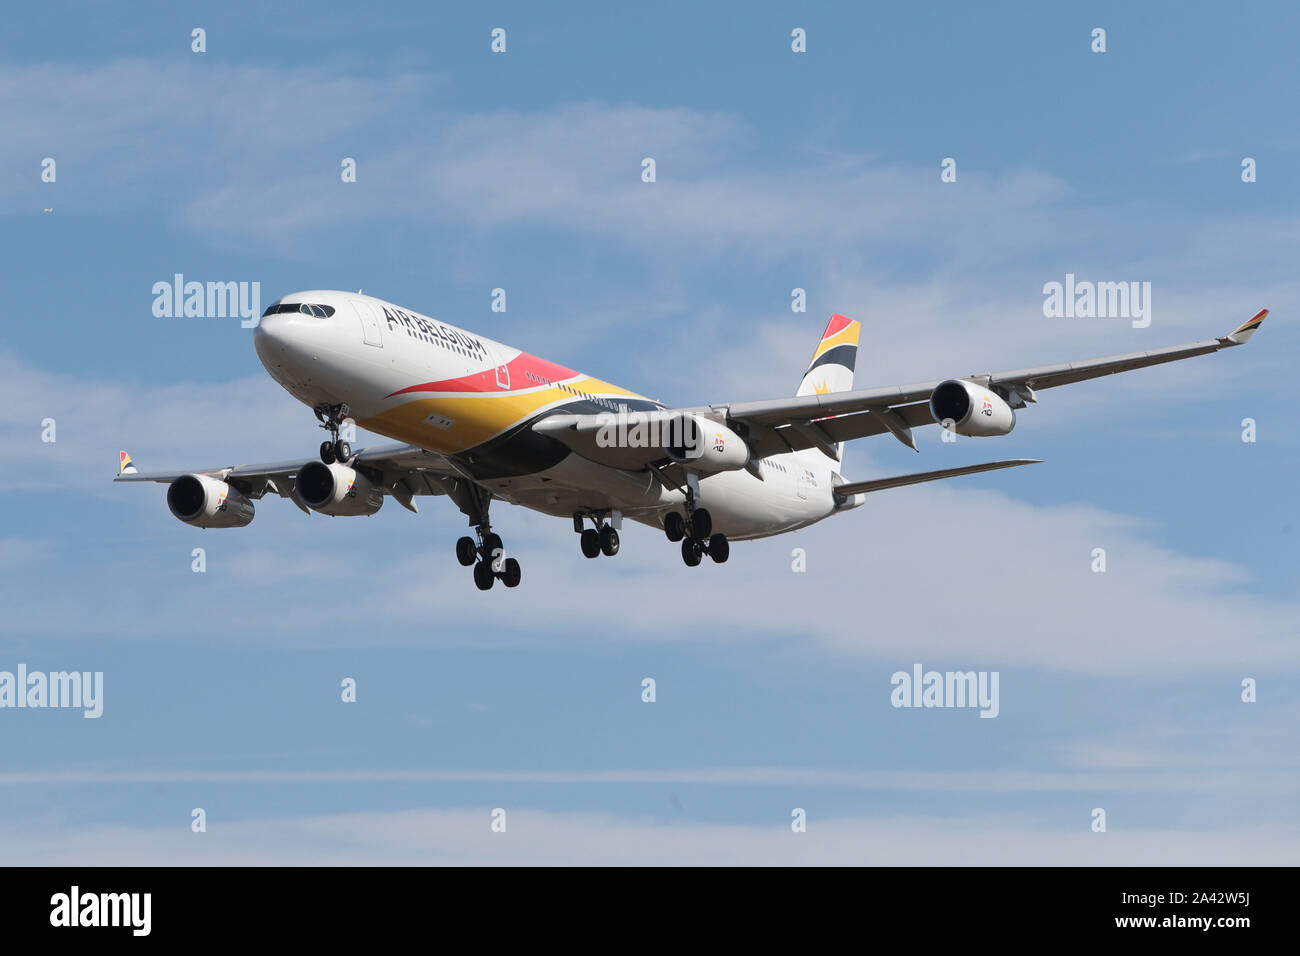 Airbus A340-313 Air Belgium Coming into London Heathrow Airport in the United Kingdom 00-ABA Stock Photo